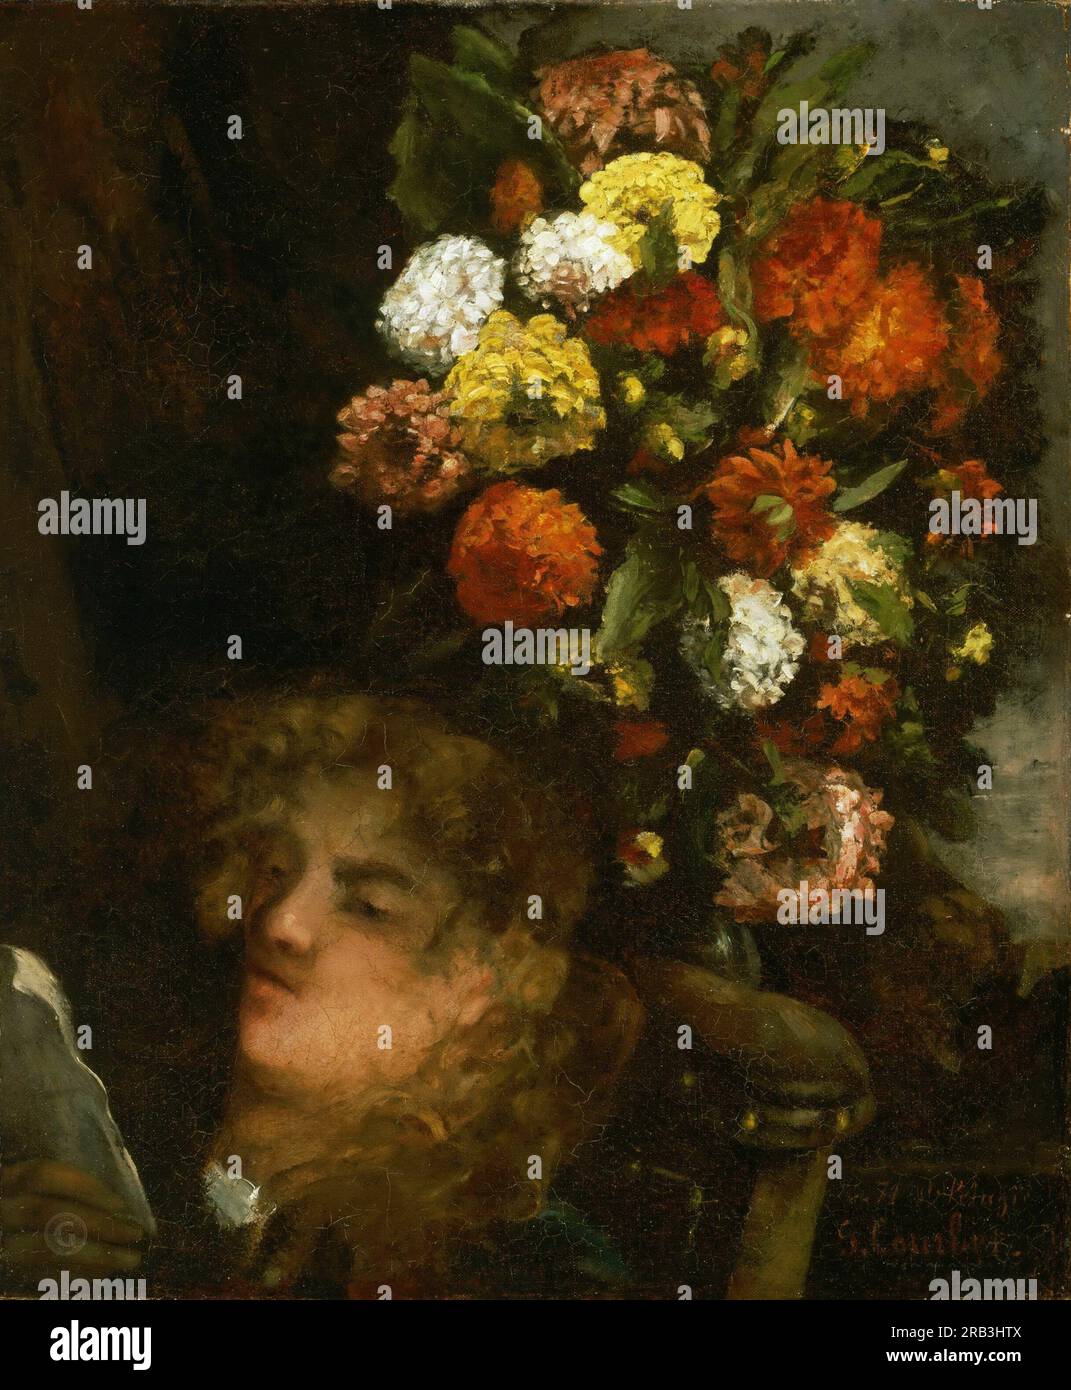 https://c8.alamy.com/comp/2RB3HTX/gustave-courbet-french-1819-1877-head-of-a-woman-and-flowers-1871-556-x-467-cm-2RB3HTX.jpg